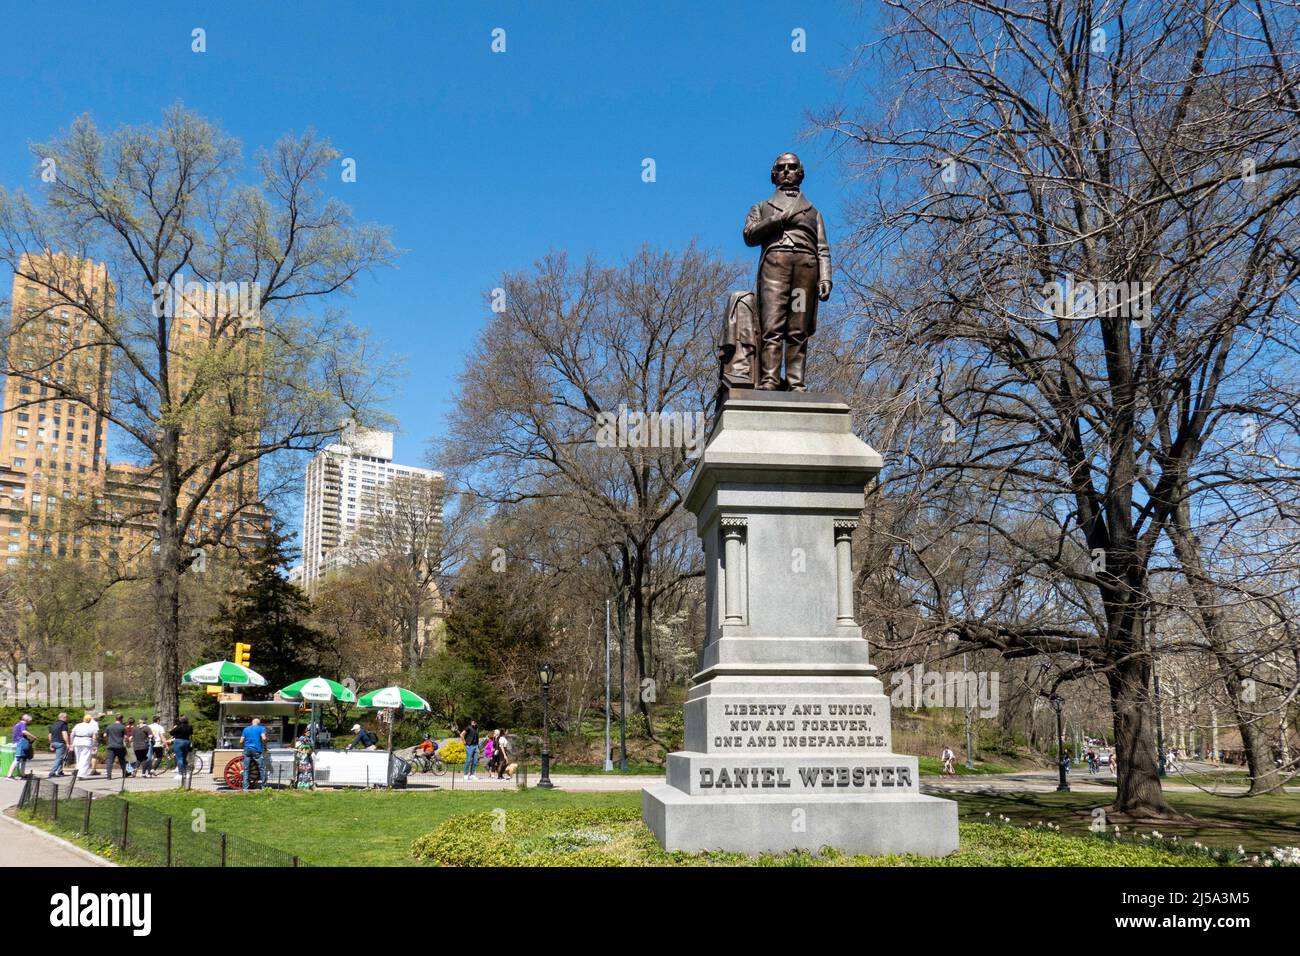 The larger-than-life-size bronze sculpture of Daniel Webster is located in Central Park, New York City, USA  2022 Stock Photo